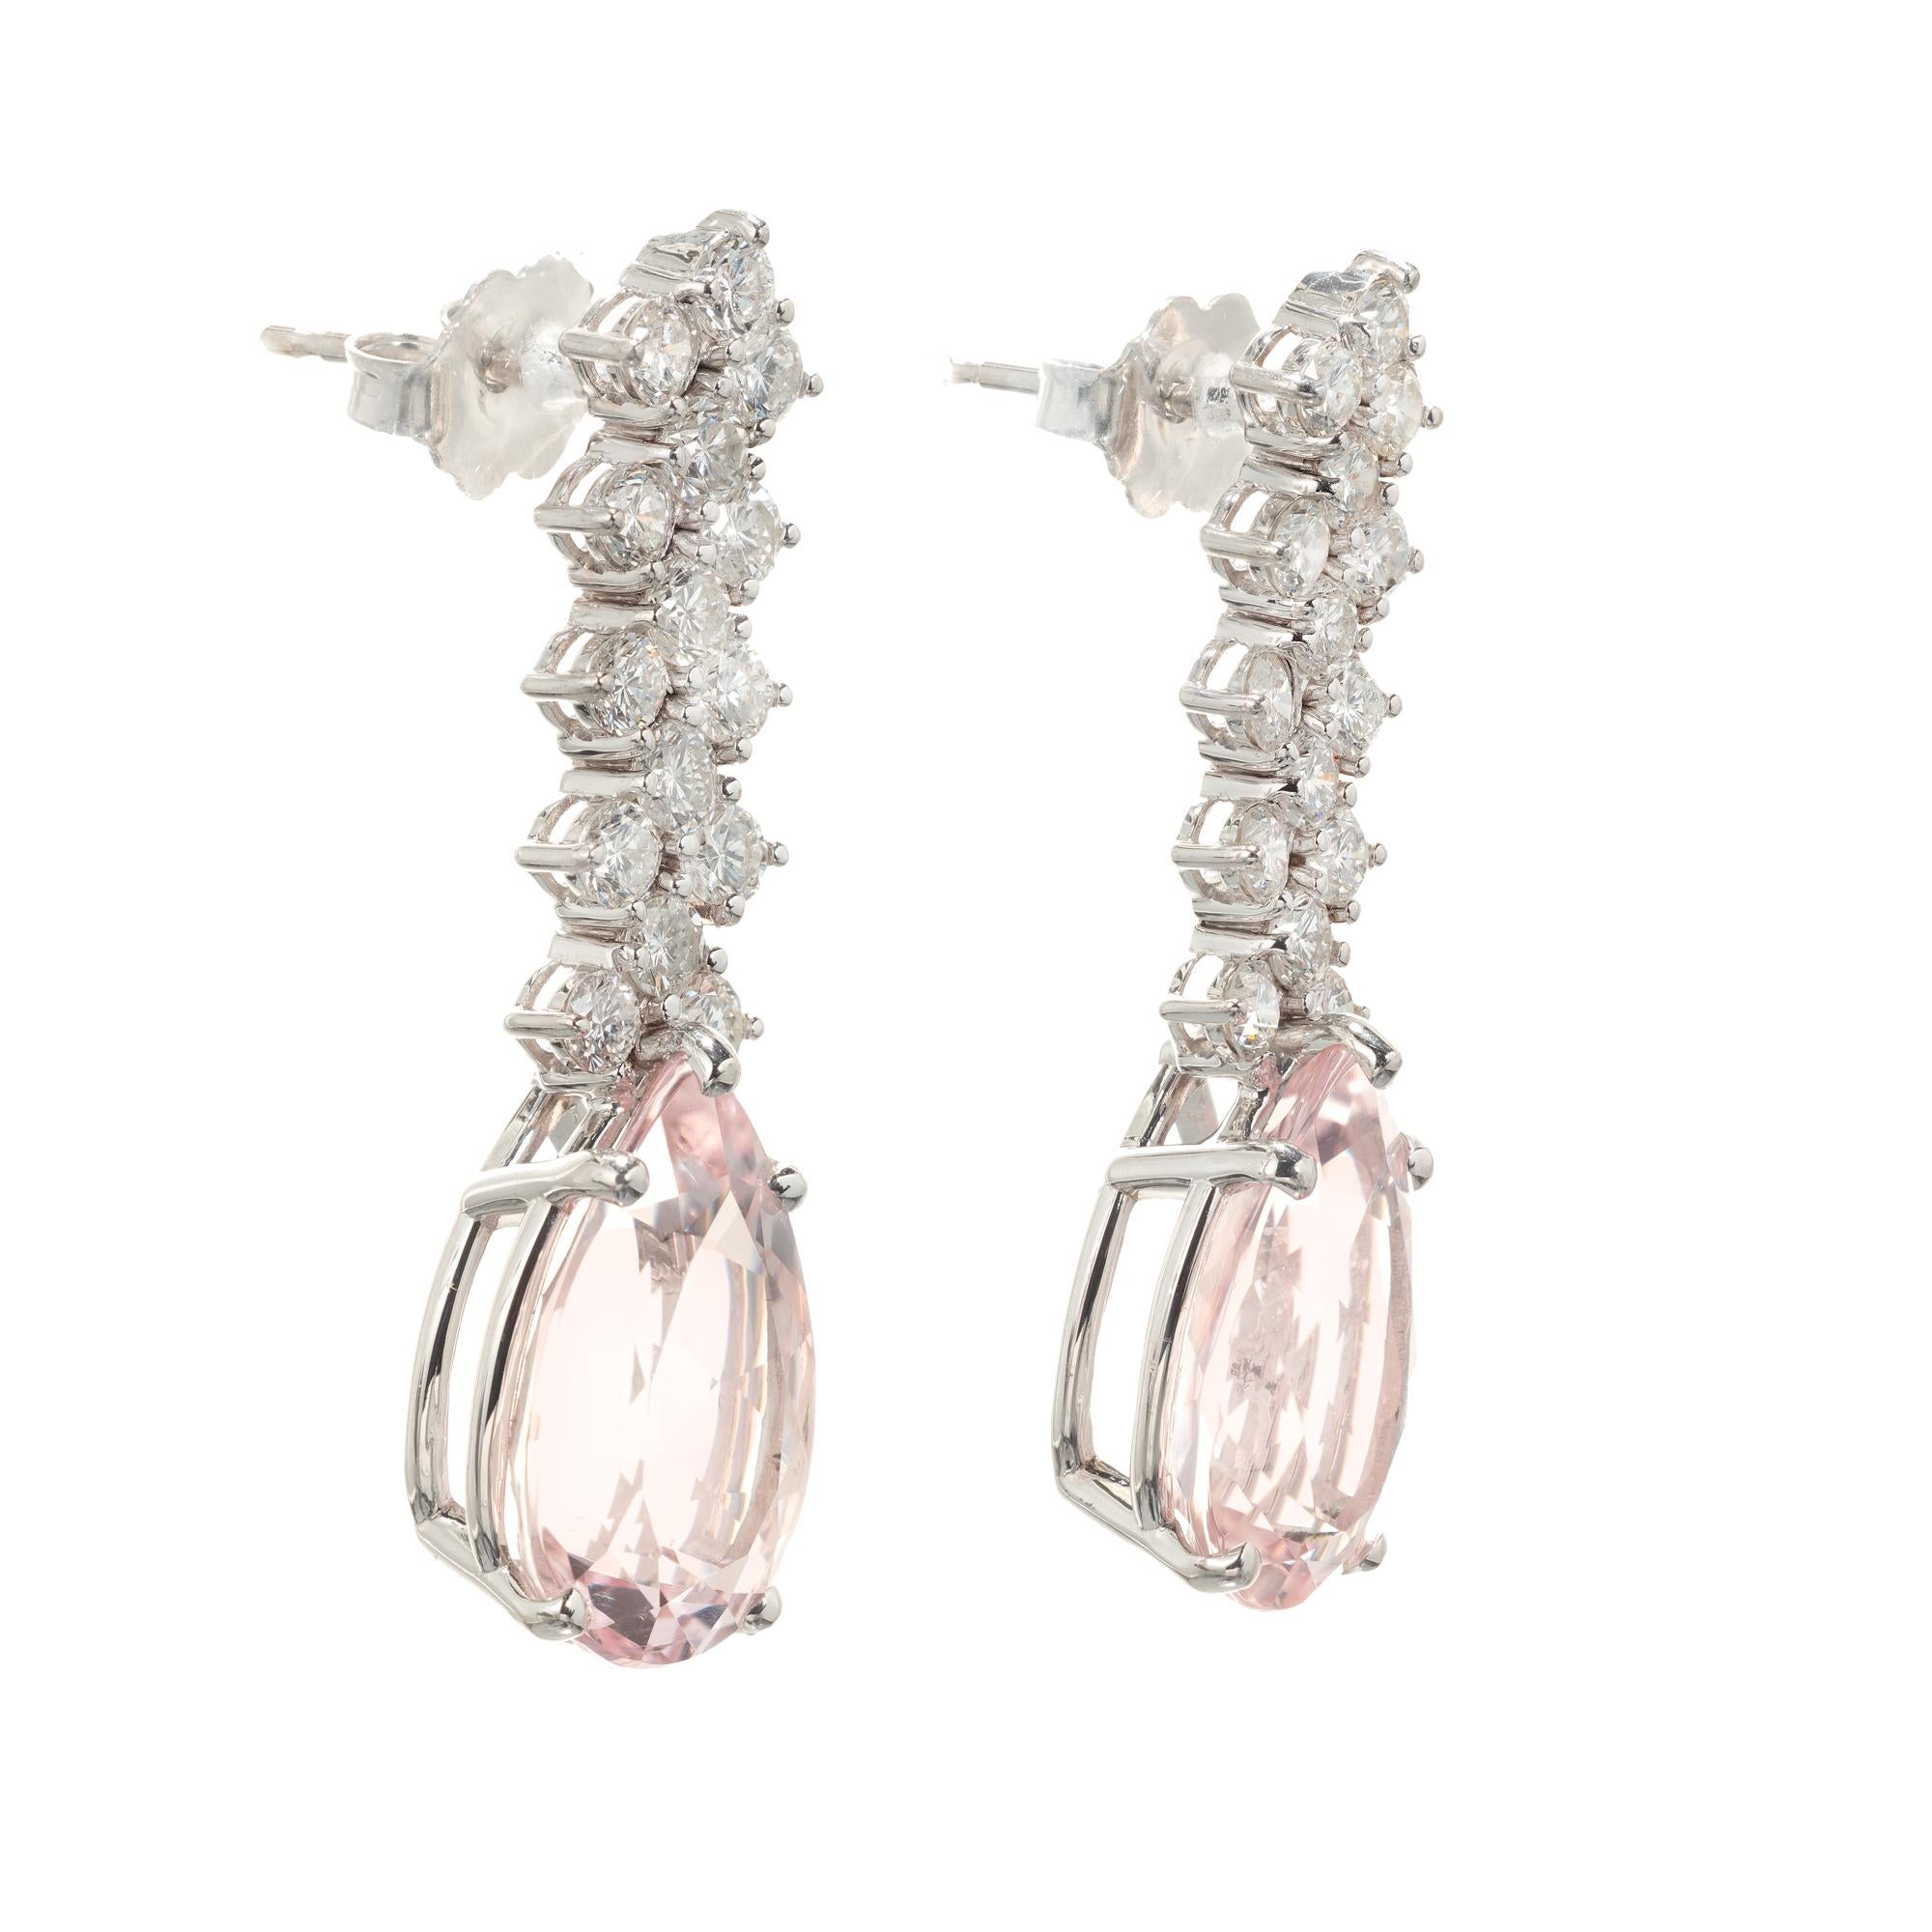 Light pink pear shaped morganite and diamond dangle drop earrings. Fllexible rows of bright white full cut diamonds. Circa 1960

2 pear shape pink morganite, approx. total weight 6.59cts, VS
30 round brilliant cut diamonds, approx. total weight